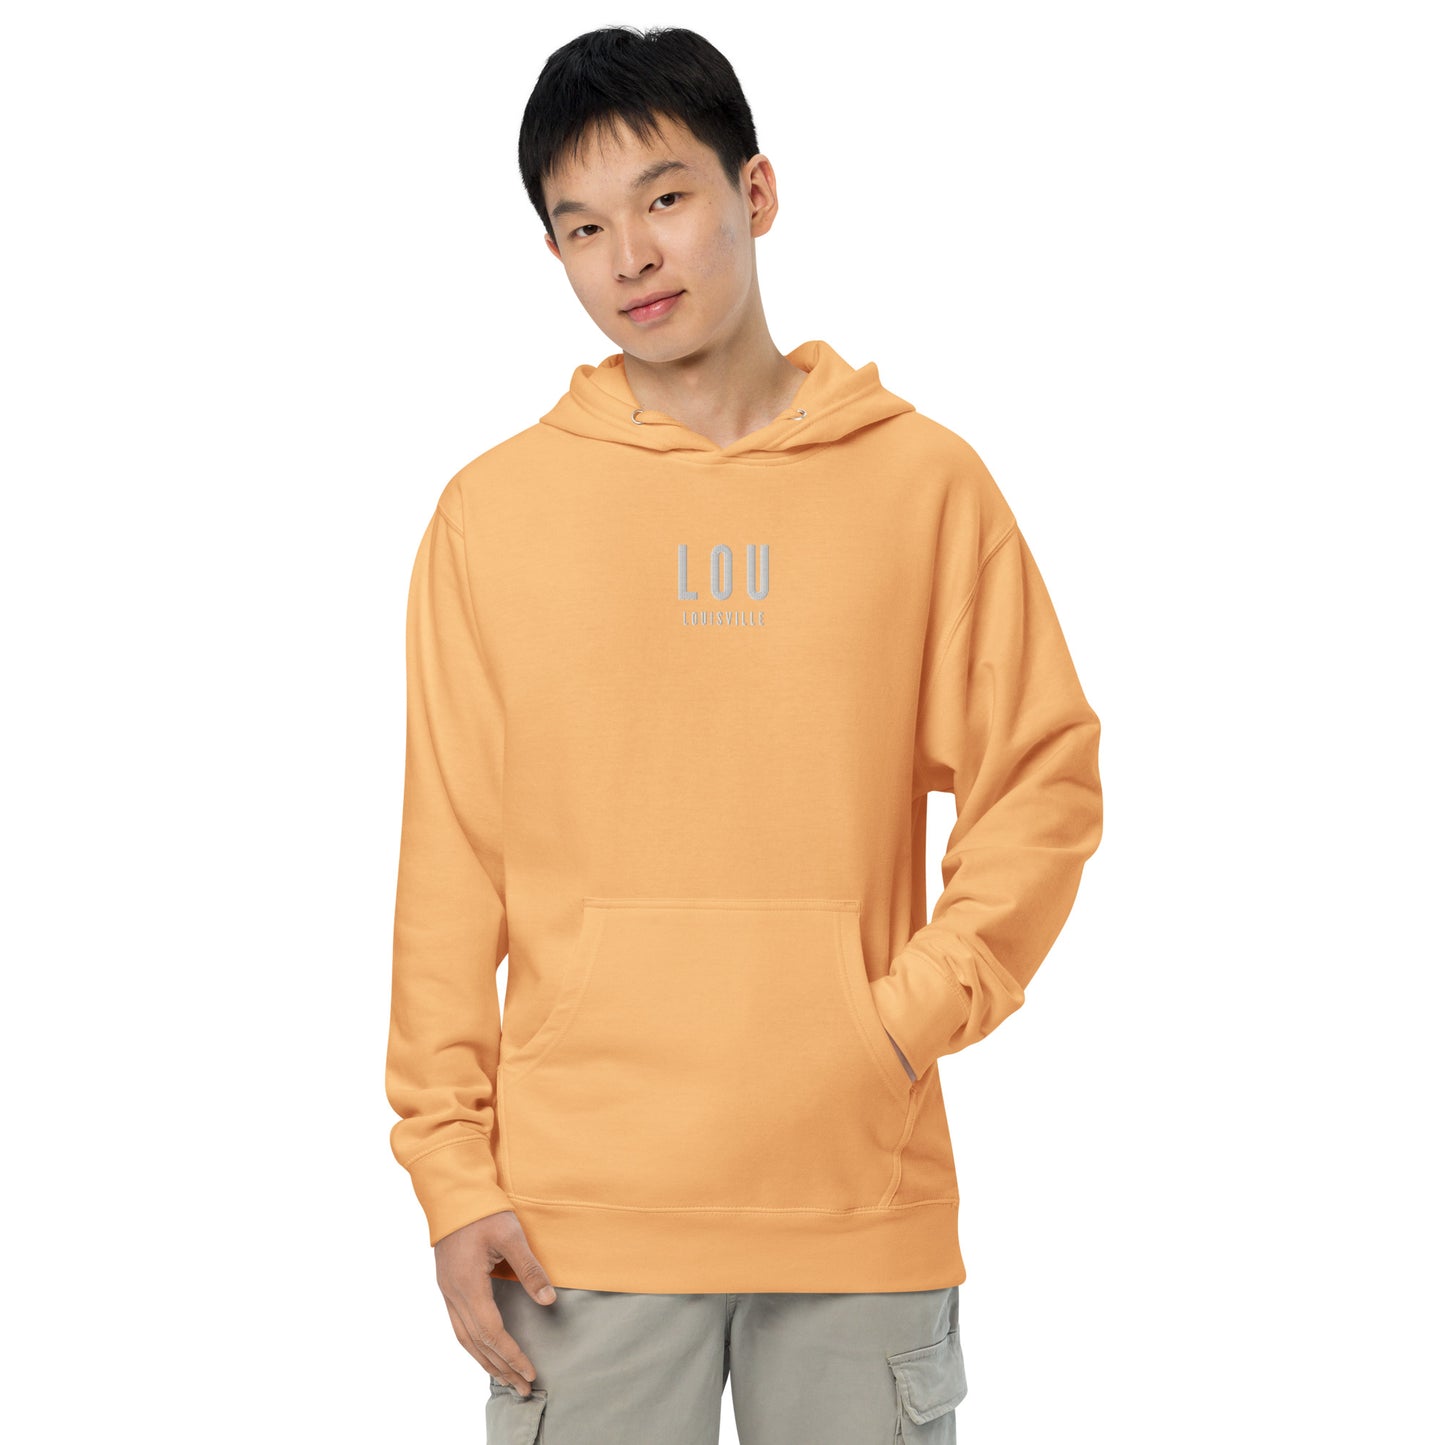 City Midweight Hoodie - White • LOU Louisville • YHM Designs - Image 06